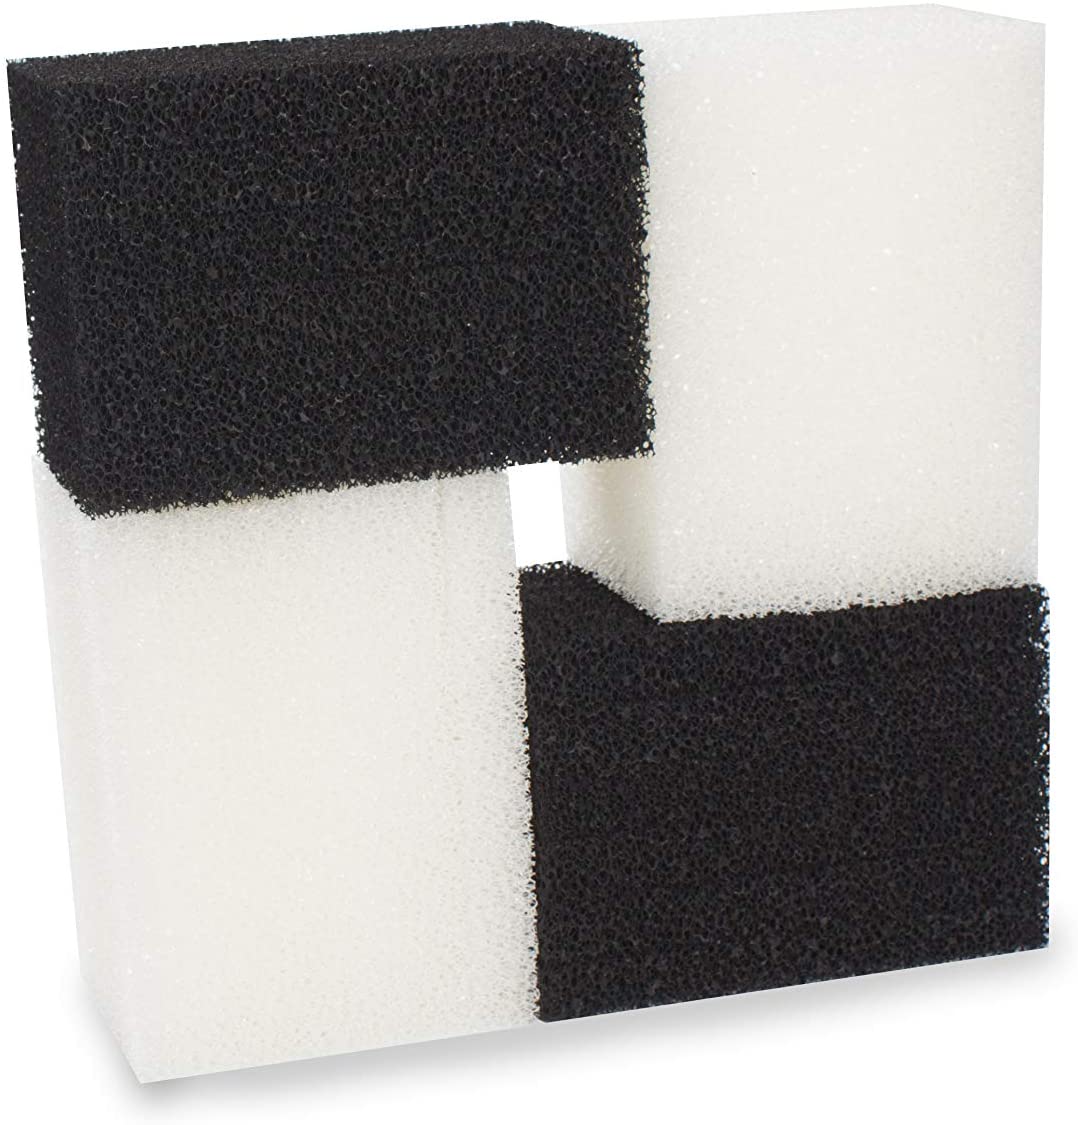 LTWHOME Compatible Foam Filters and Carbon Filters Set Suitable for Interpet PF3 Internal Filter(Pack of 24)